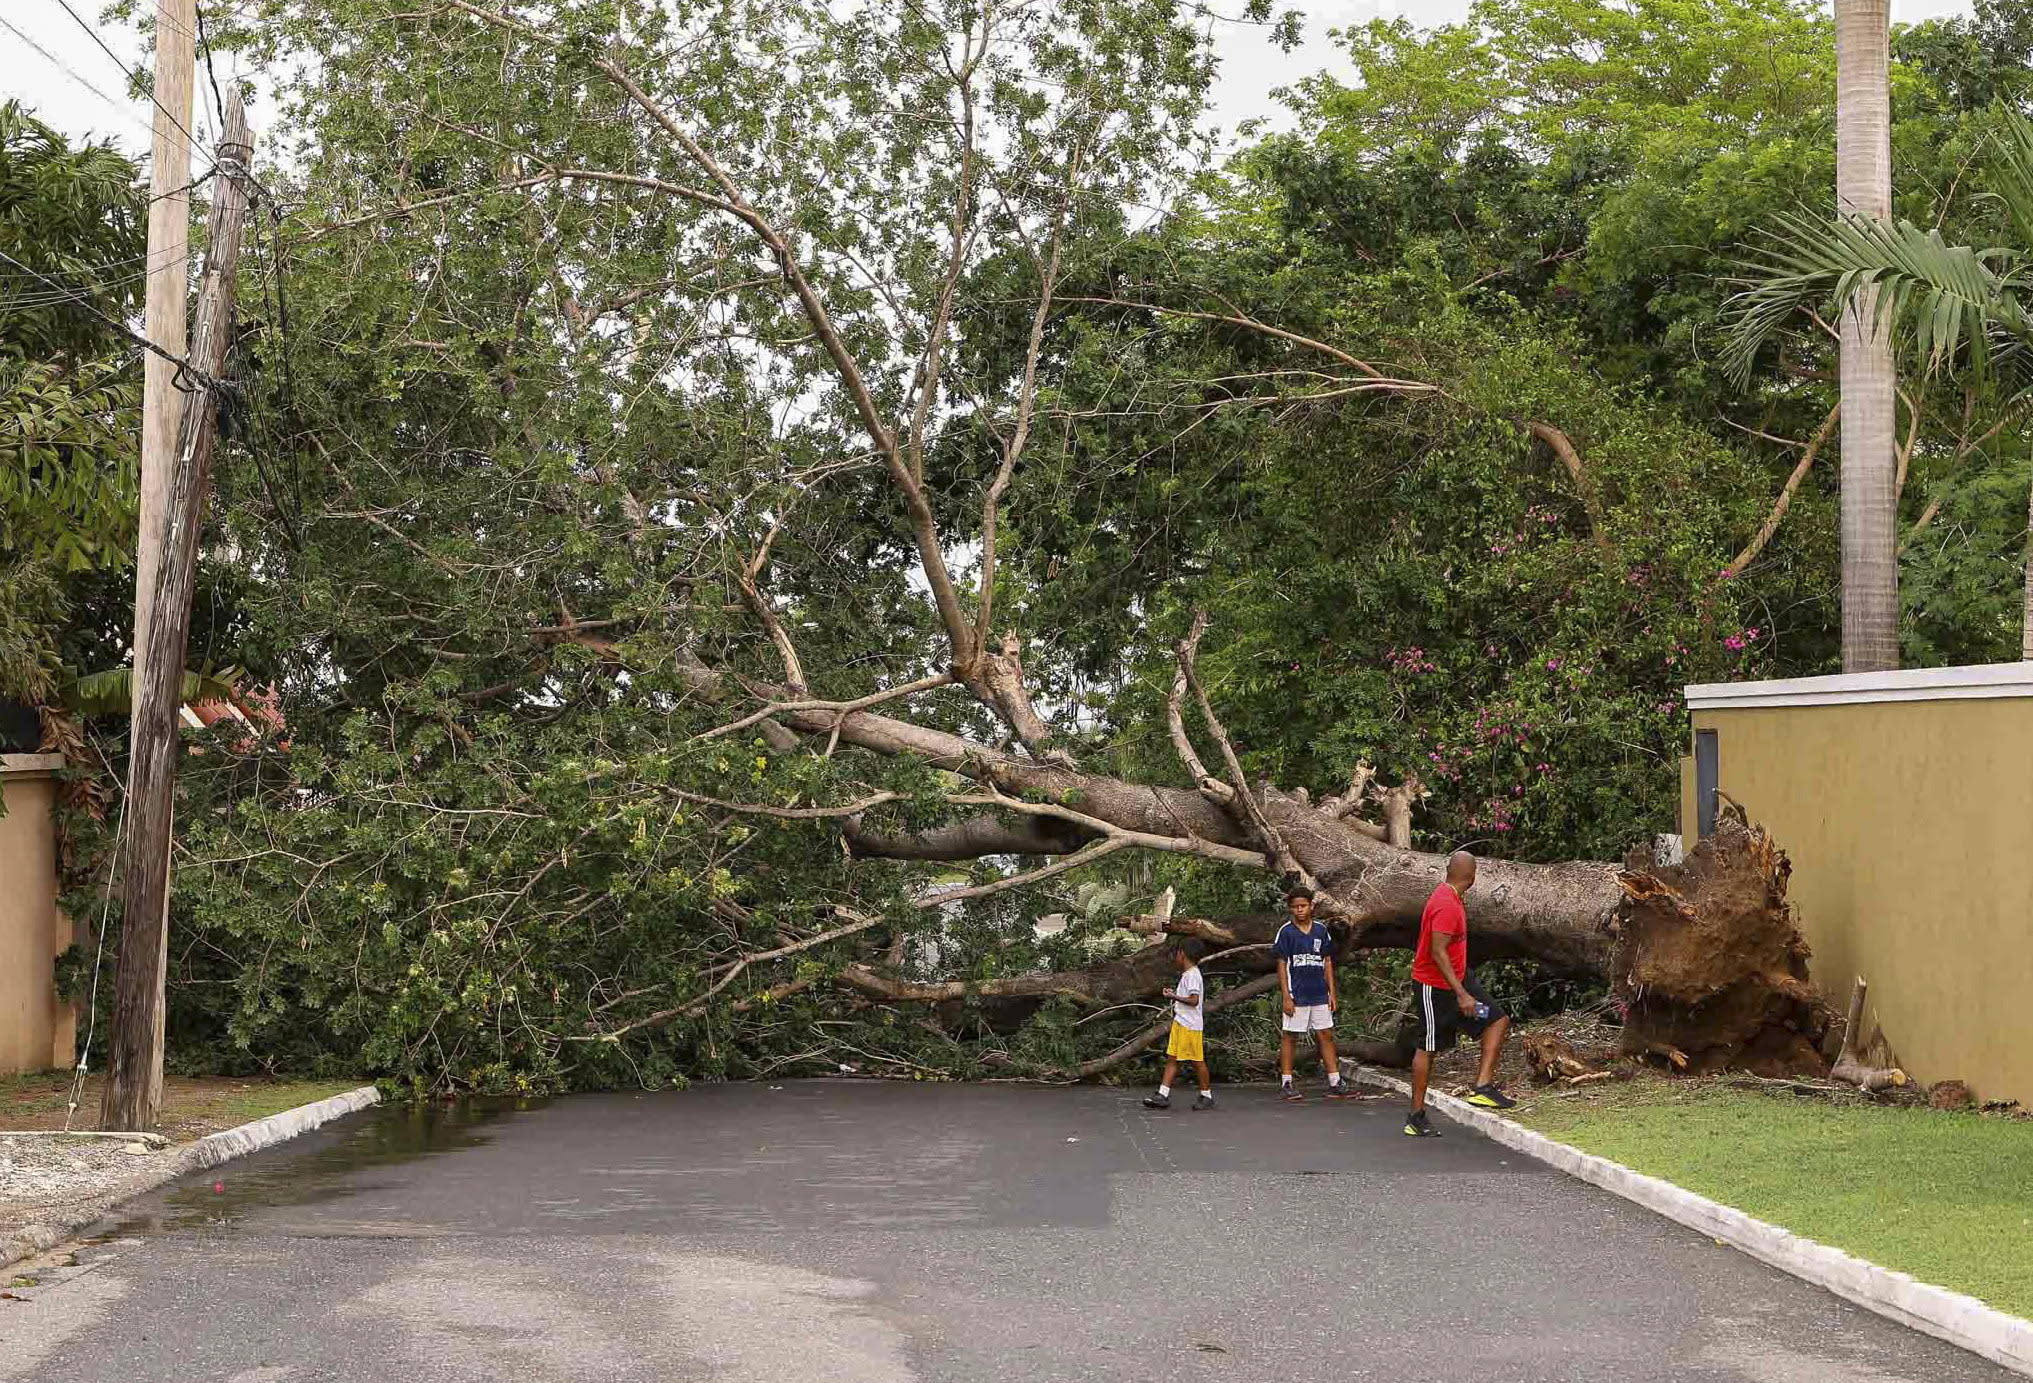 A tree felled by Hurricane Beryl blocks a street, where an adult and two kids stand, in Kingston, Jamaica, on July 4. 